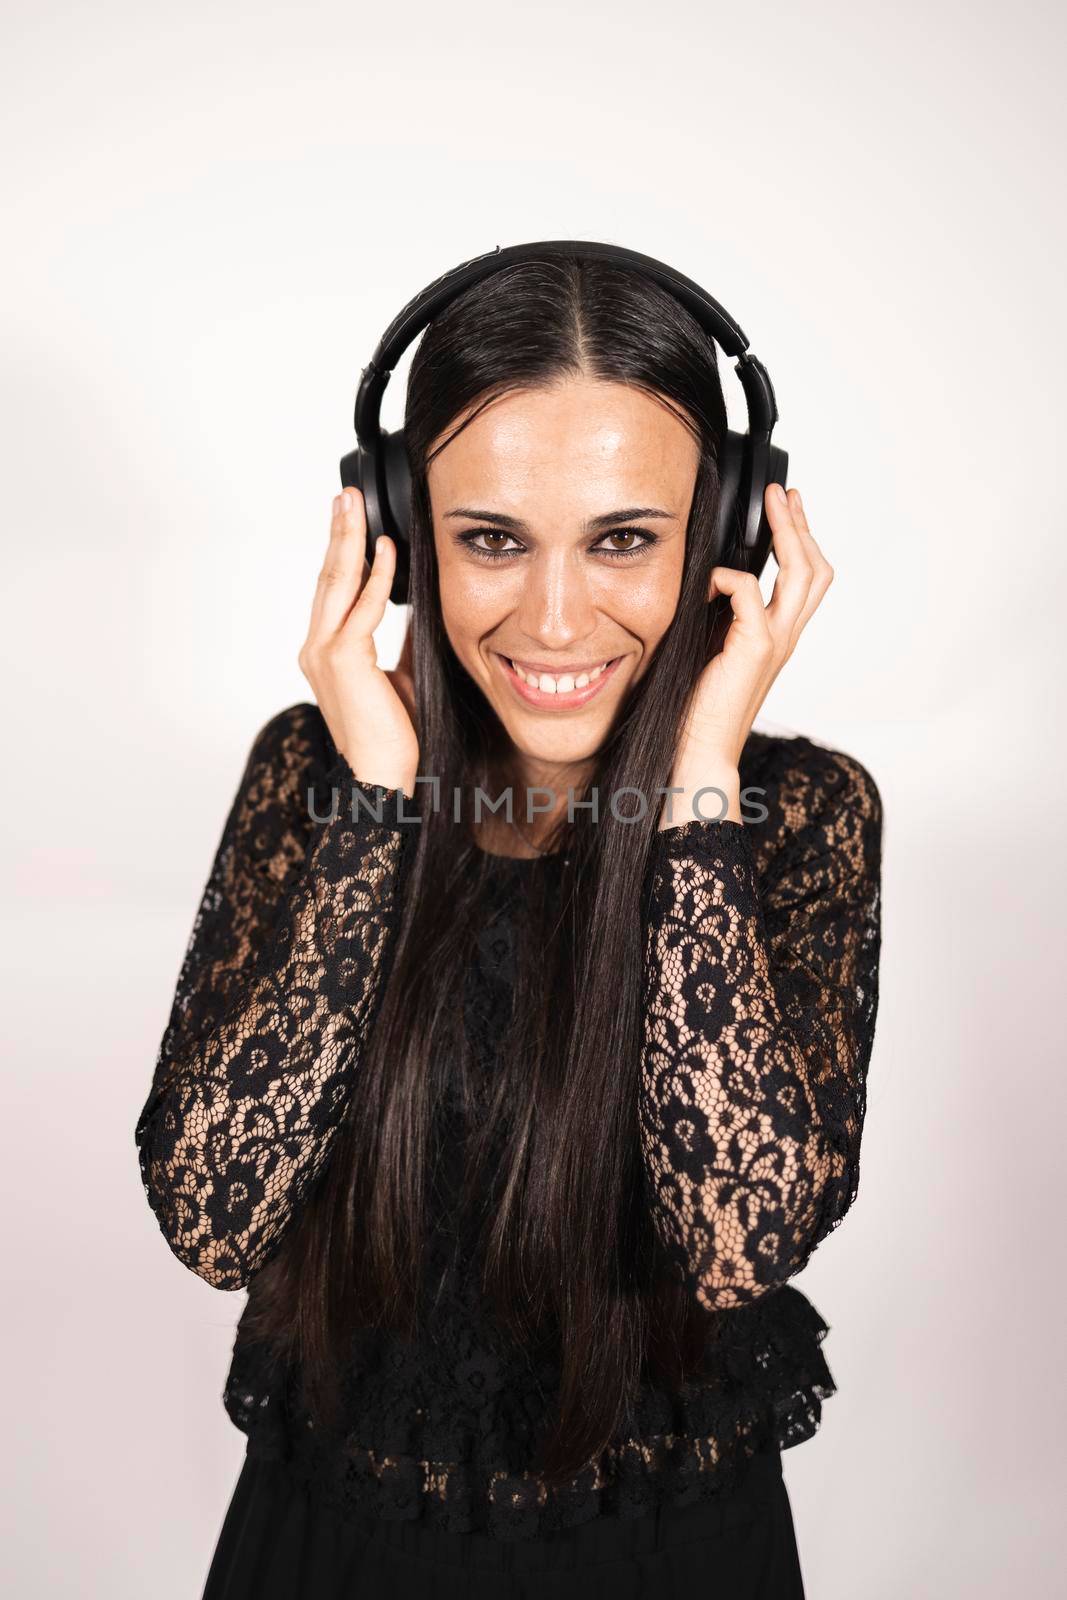 A young elegant female musician looking at camera listening to some music by stockrojoverdeyazul